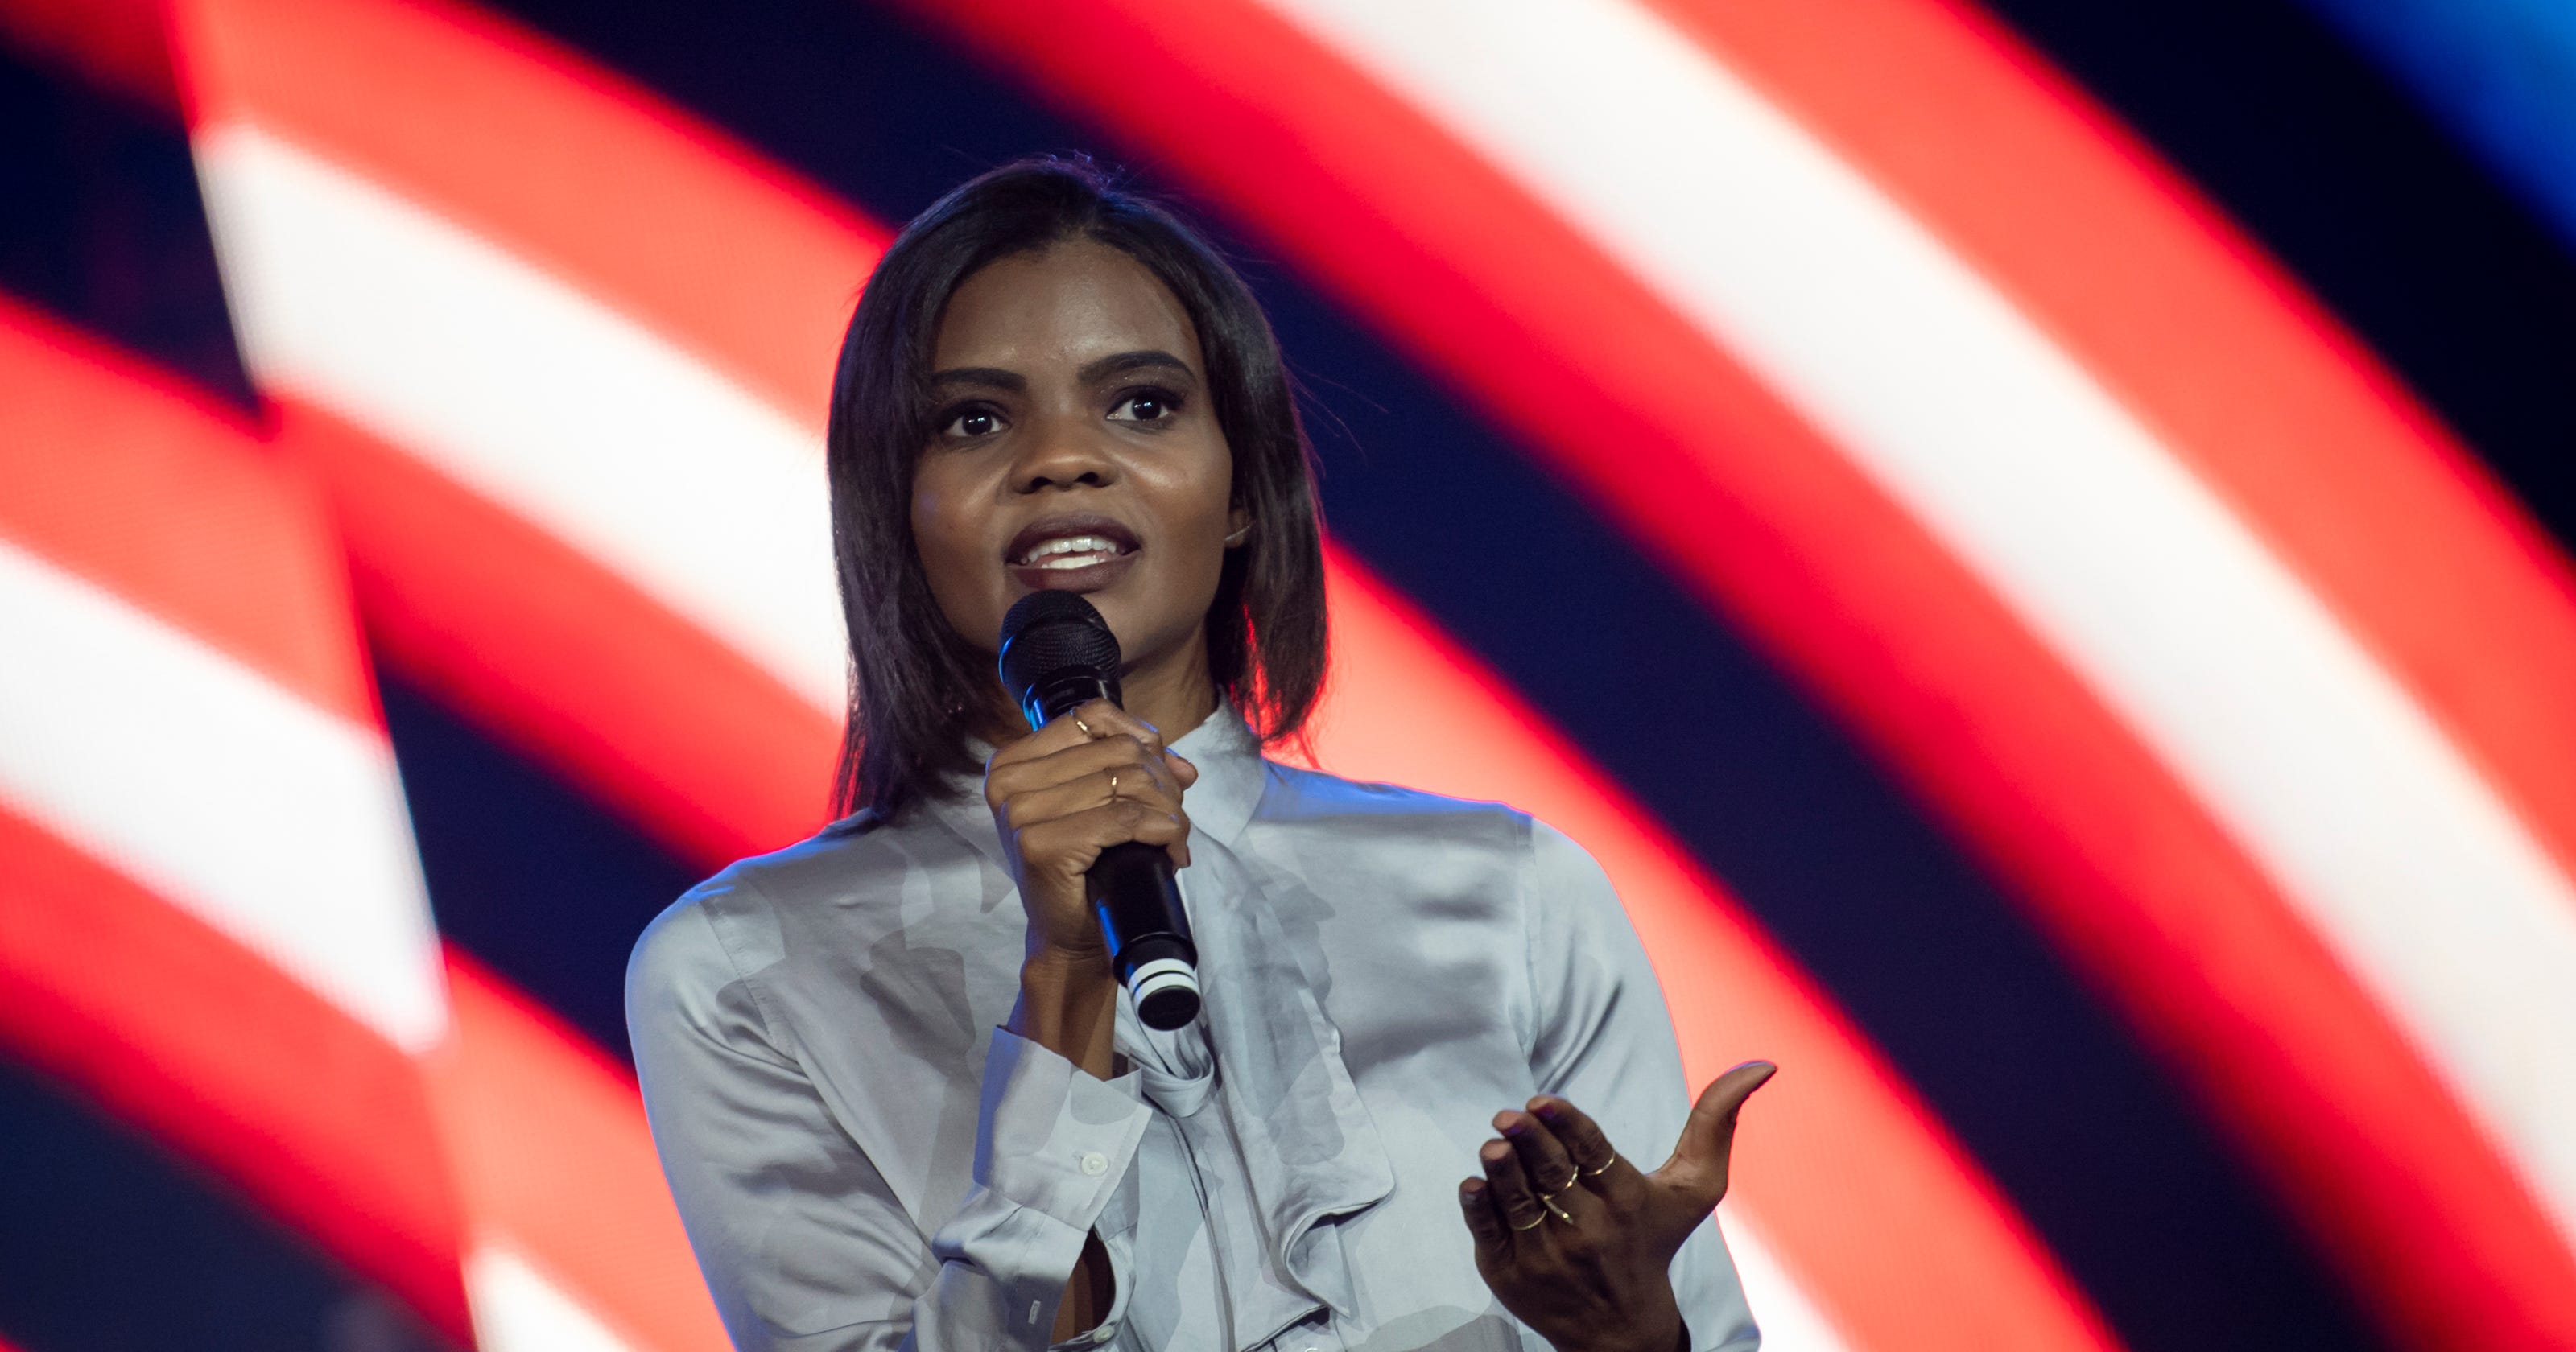 Candace Owens Contradicted By Dhs On Threat Of White Nationalism